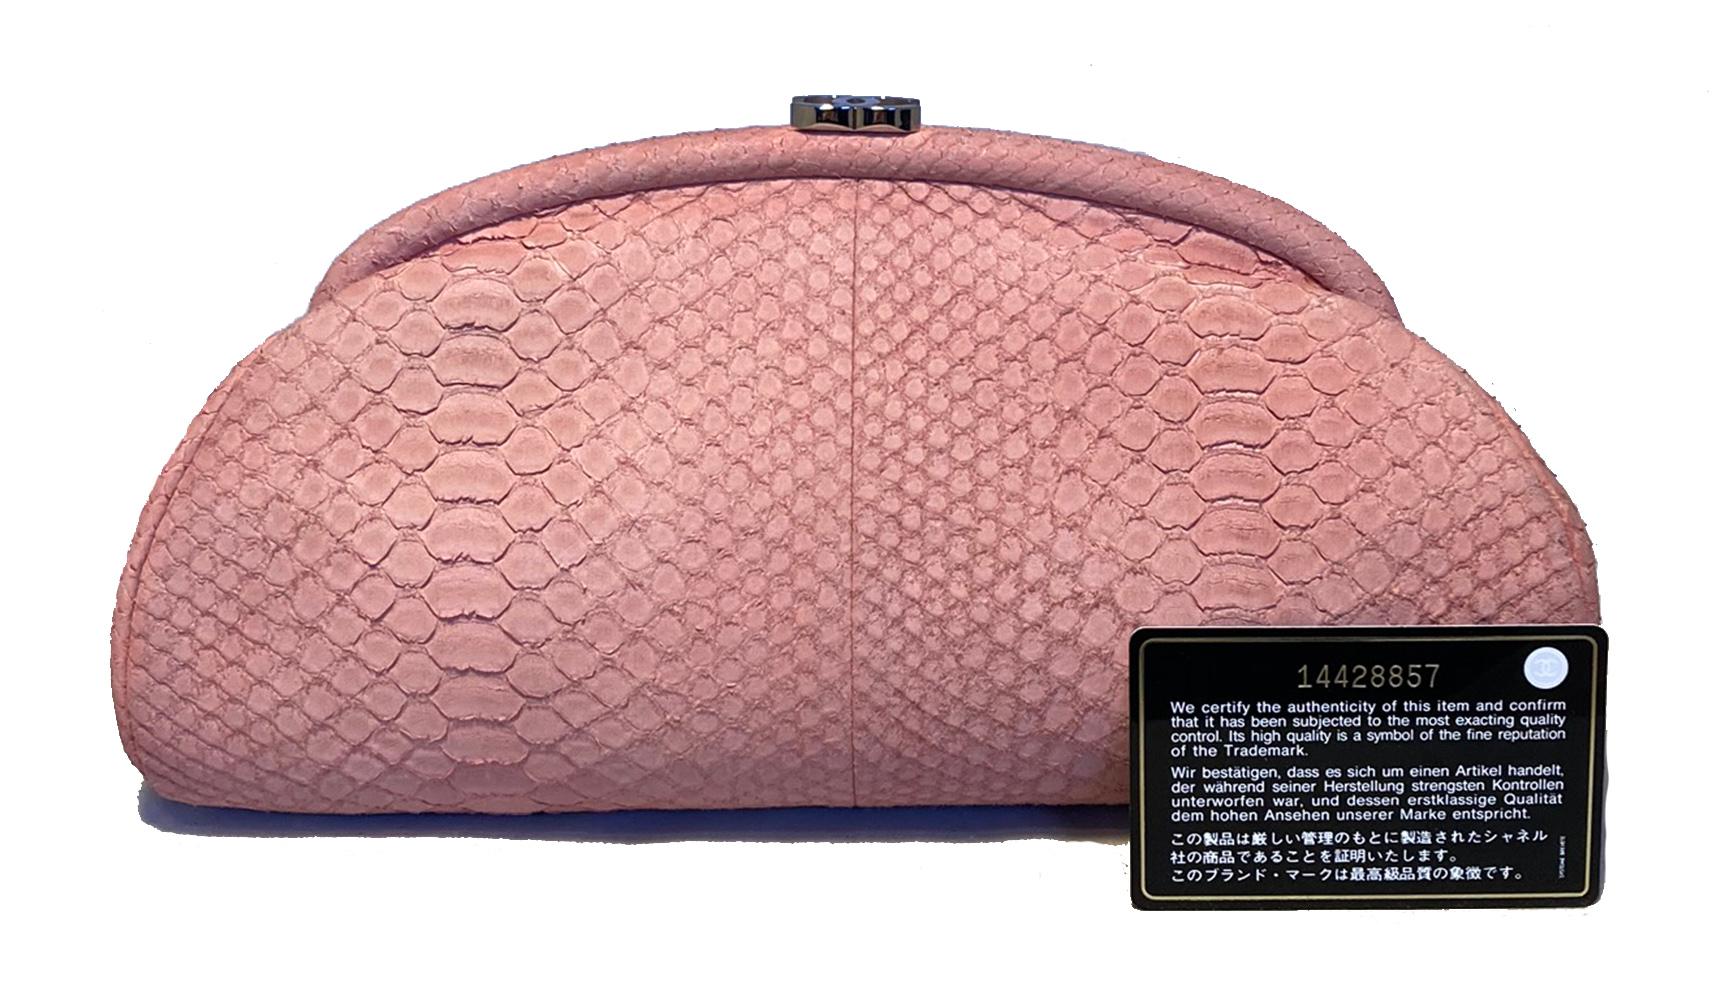 Chanel Pink Python Timeless Clutch in excellent condition. Pink peach matte python snakeskin exterior trimmed with gunmetal CC logo lift top closure. Pale pink soft lambskin leather interior with one side zippered pocket. Clean corners and exterior